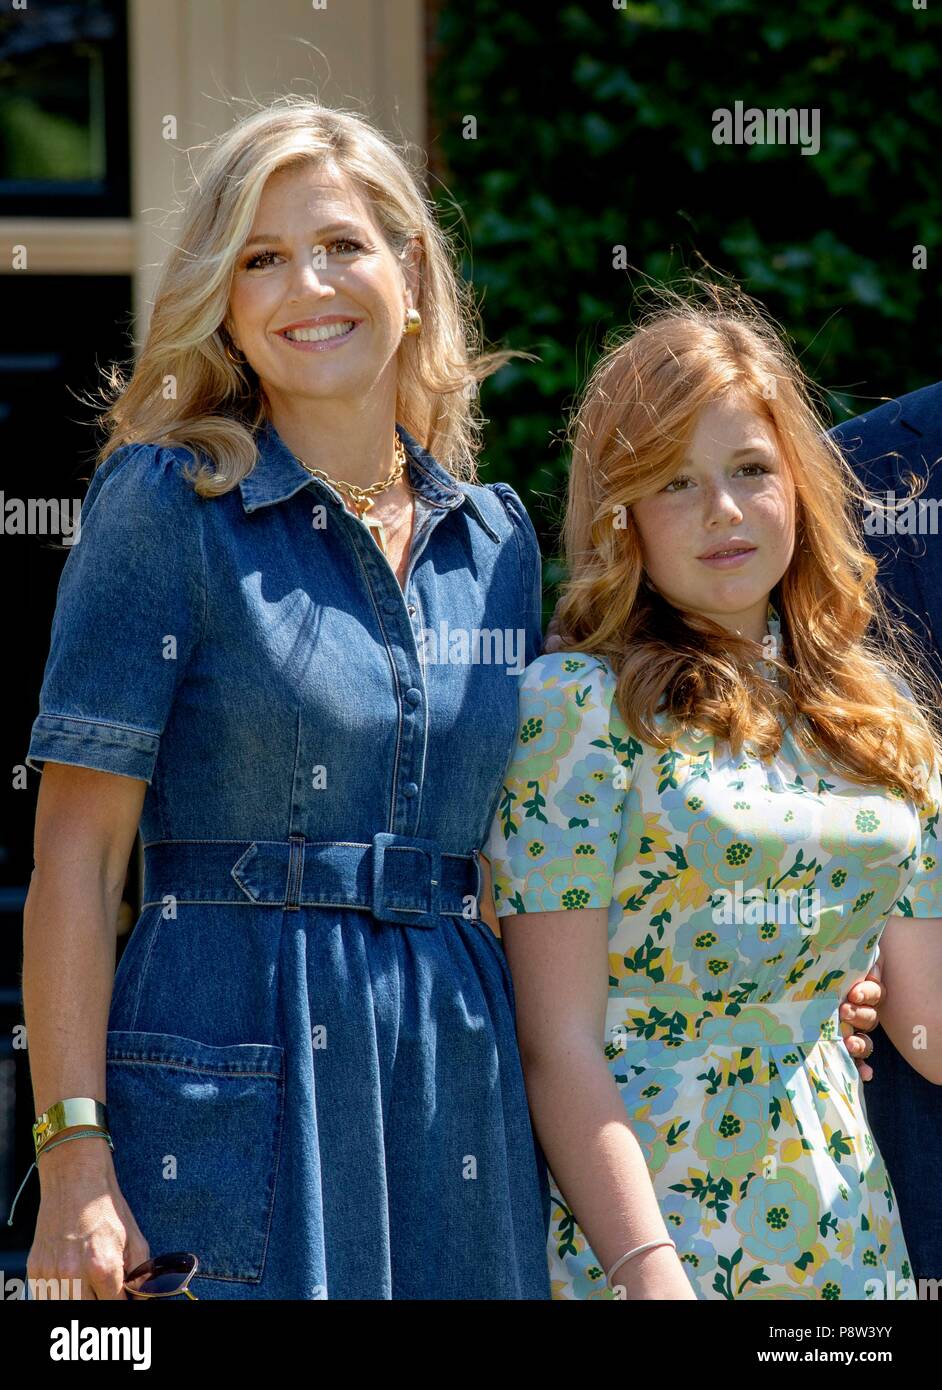 Wassenaar, Netherlands. 13th July, 2018. Queen Maxima and Princess Alexia  of The Netherlands at villa the Eikenhorst at the Horsten estate in  Wassenaar, on July 13, 2018, posing for the media during